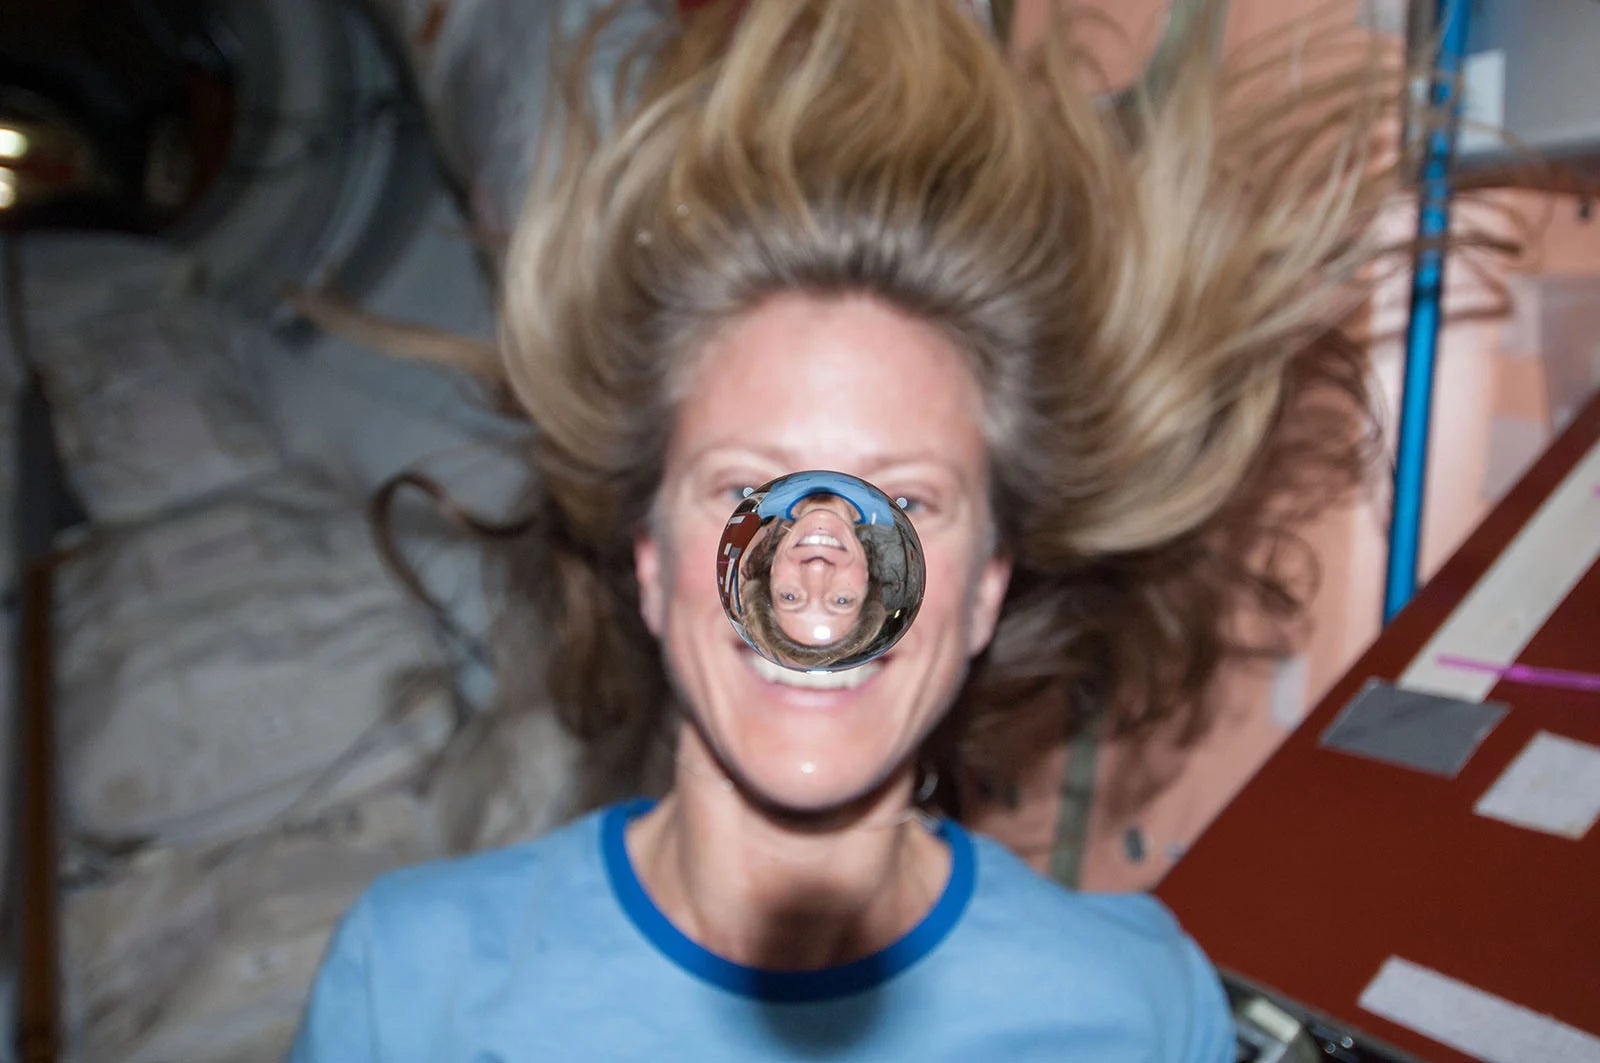 NASA astronaut Karen Nyberg watches a water bubble float freely between her and the camera, showing her image refracted in the droplet.